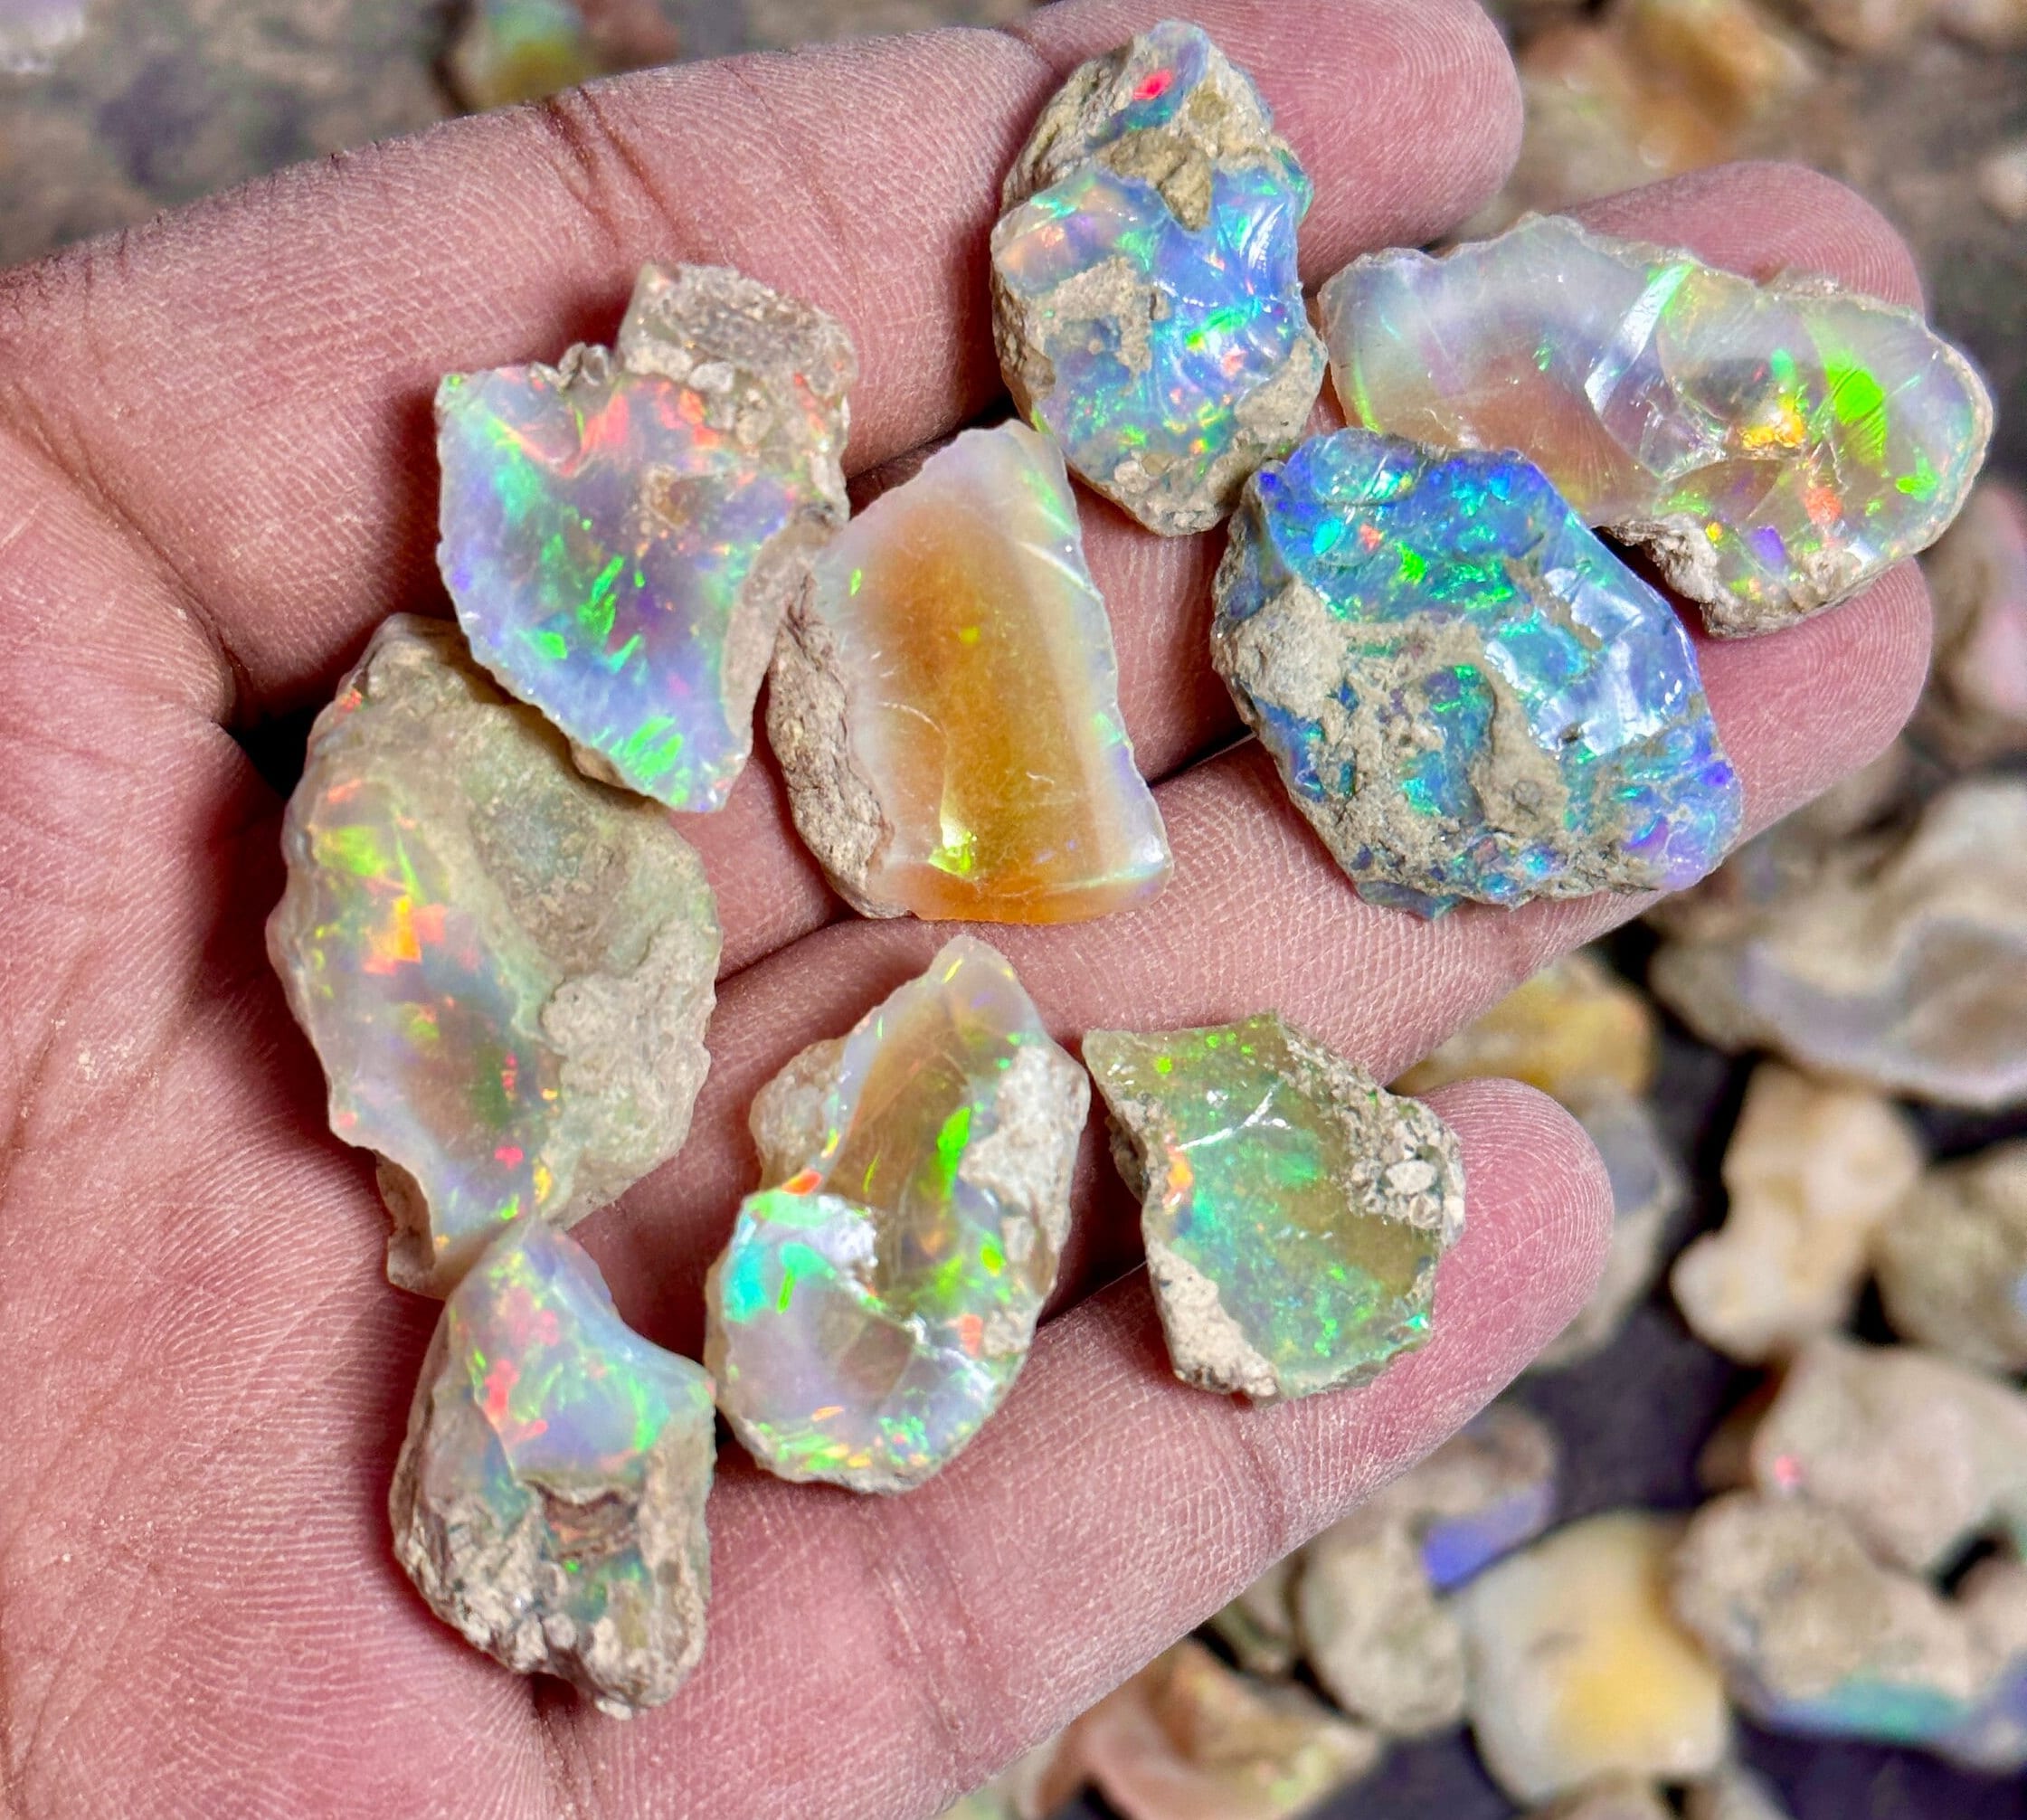 Crystalshop Raw Opal Crystals - 25Cts Genuine Natural AAA Grade Opal Gram  Lot, Reiki Crystals and Healing Stones,Jewelry Making Gemstone, Ultra Fire